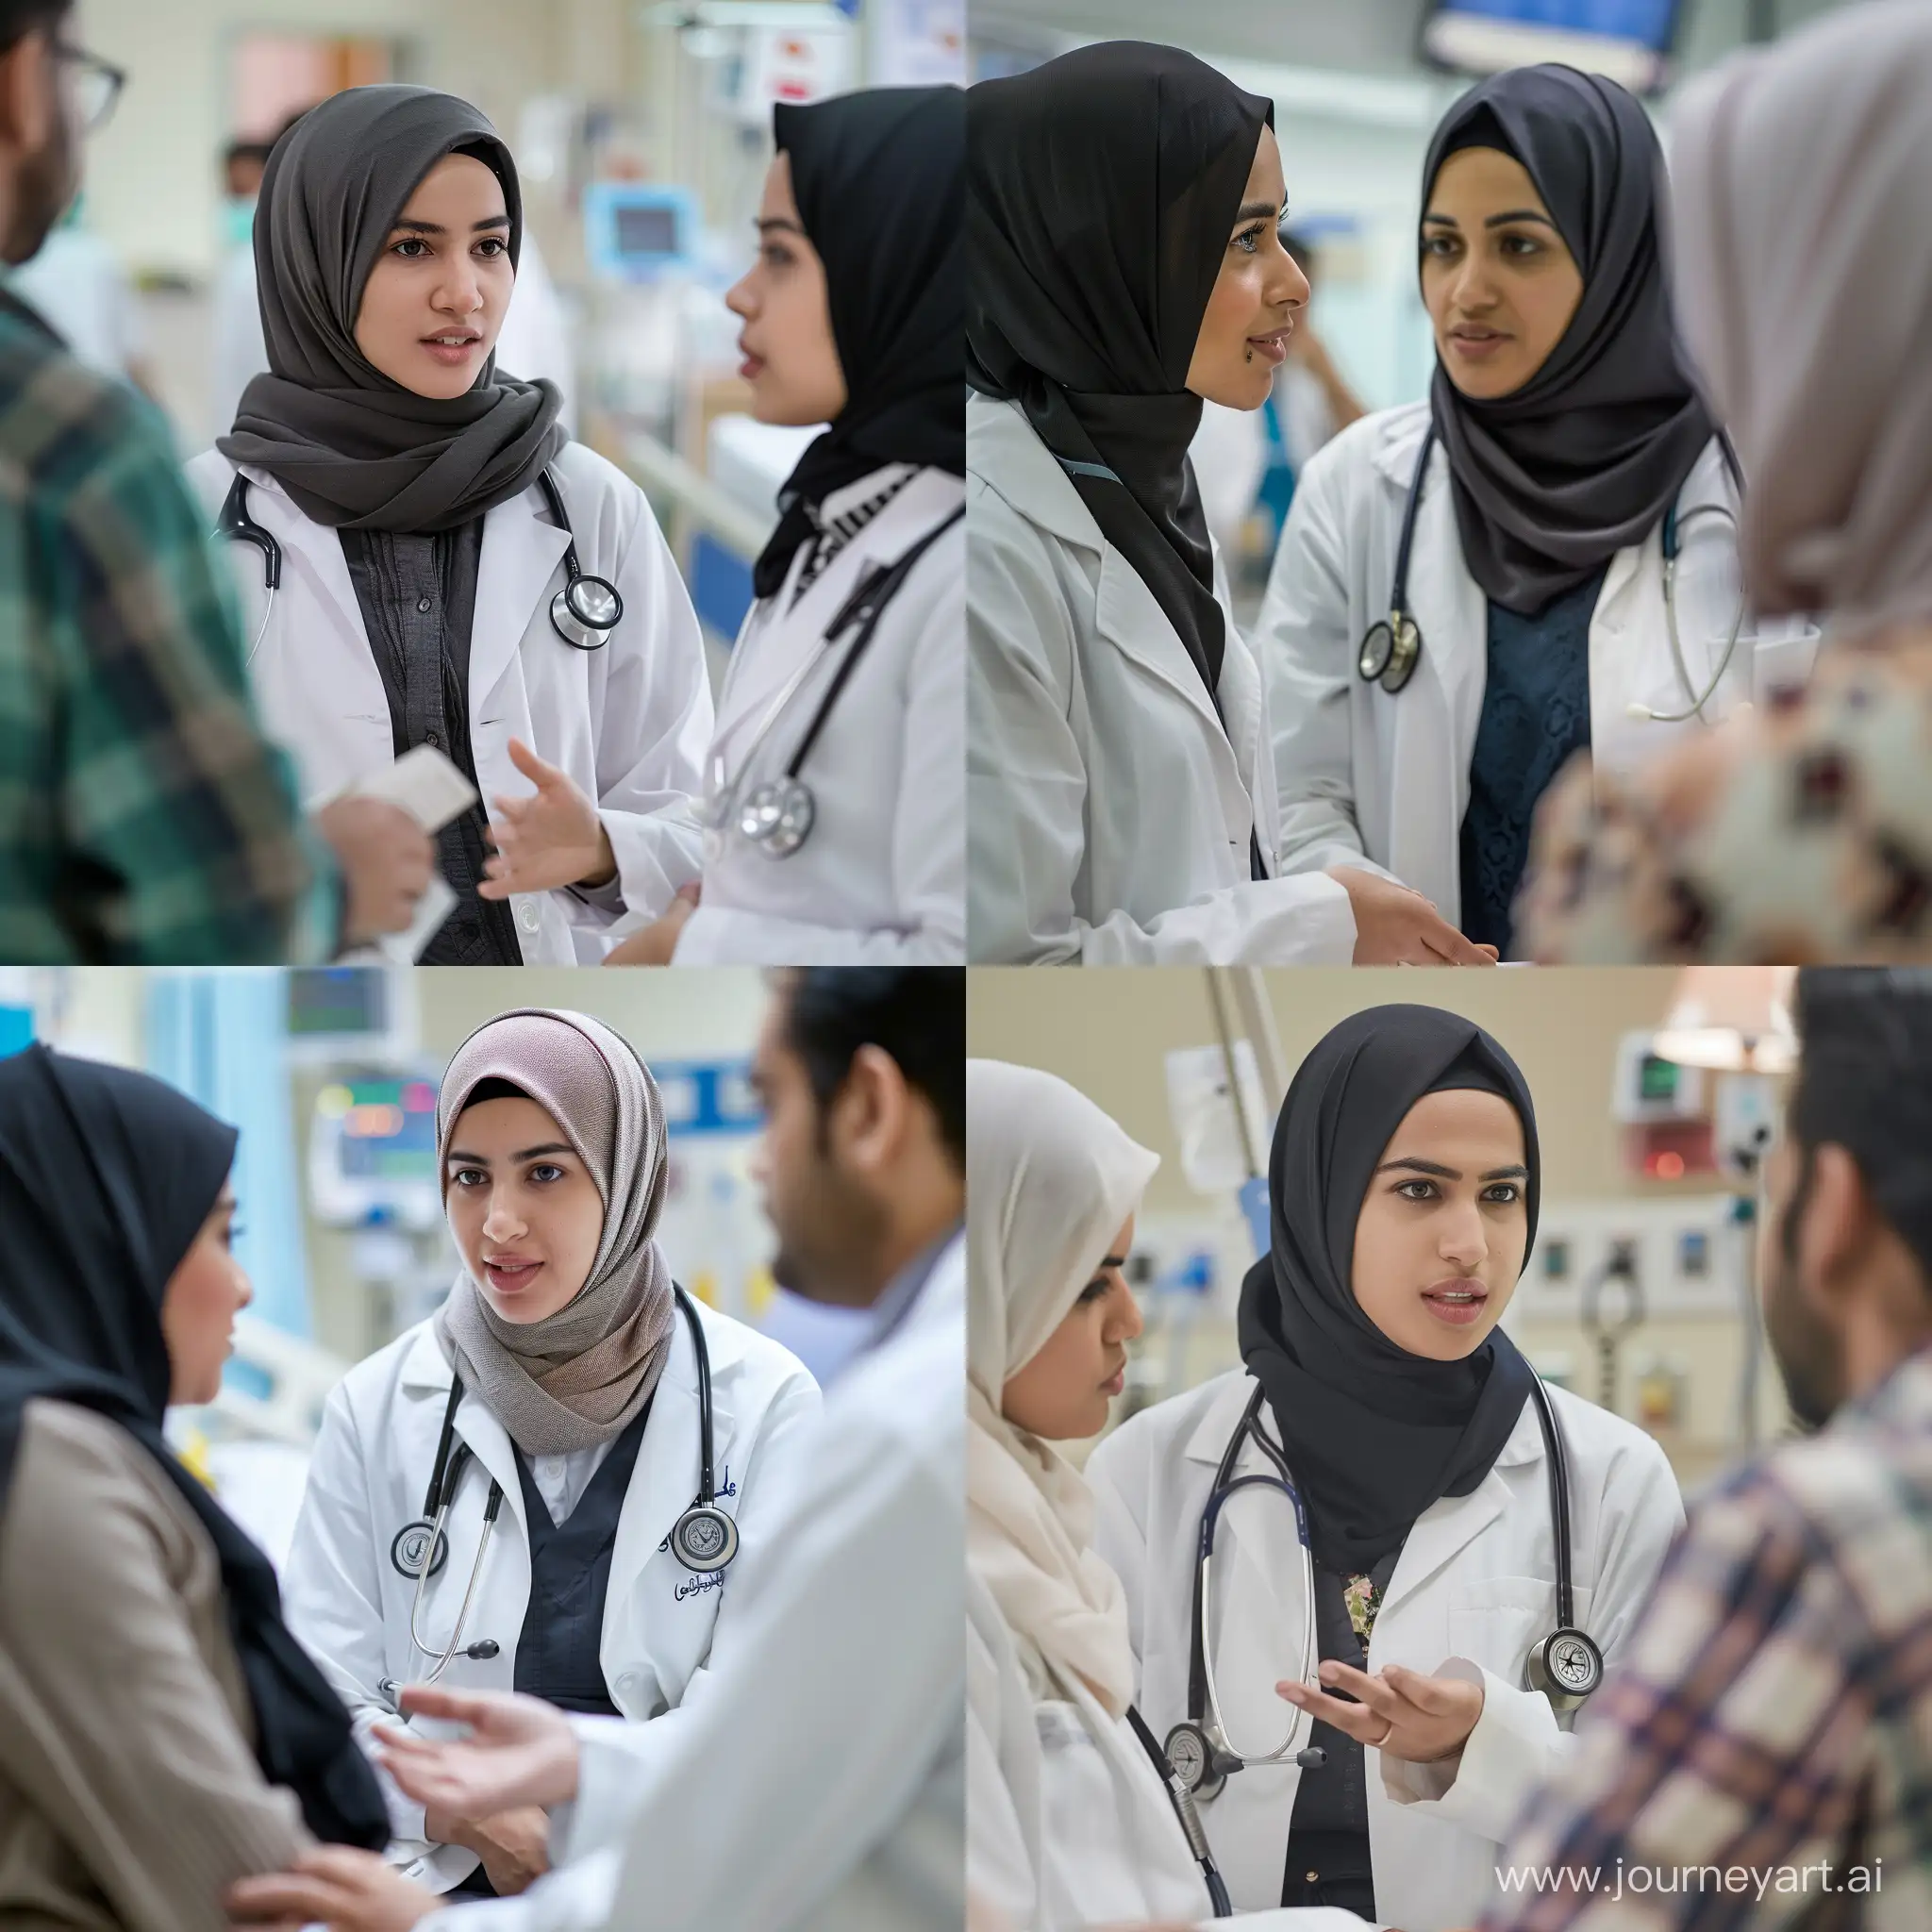 Female-Medical-Student-in-Hijab-Explaining-Diagnosis-to-Patient-at-Hospital